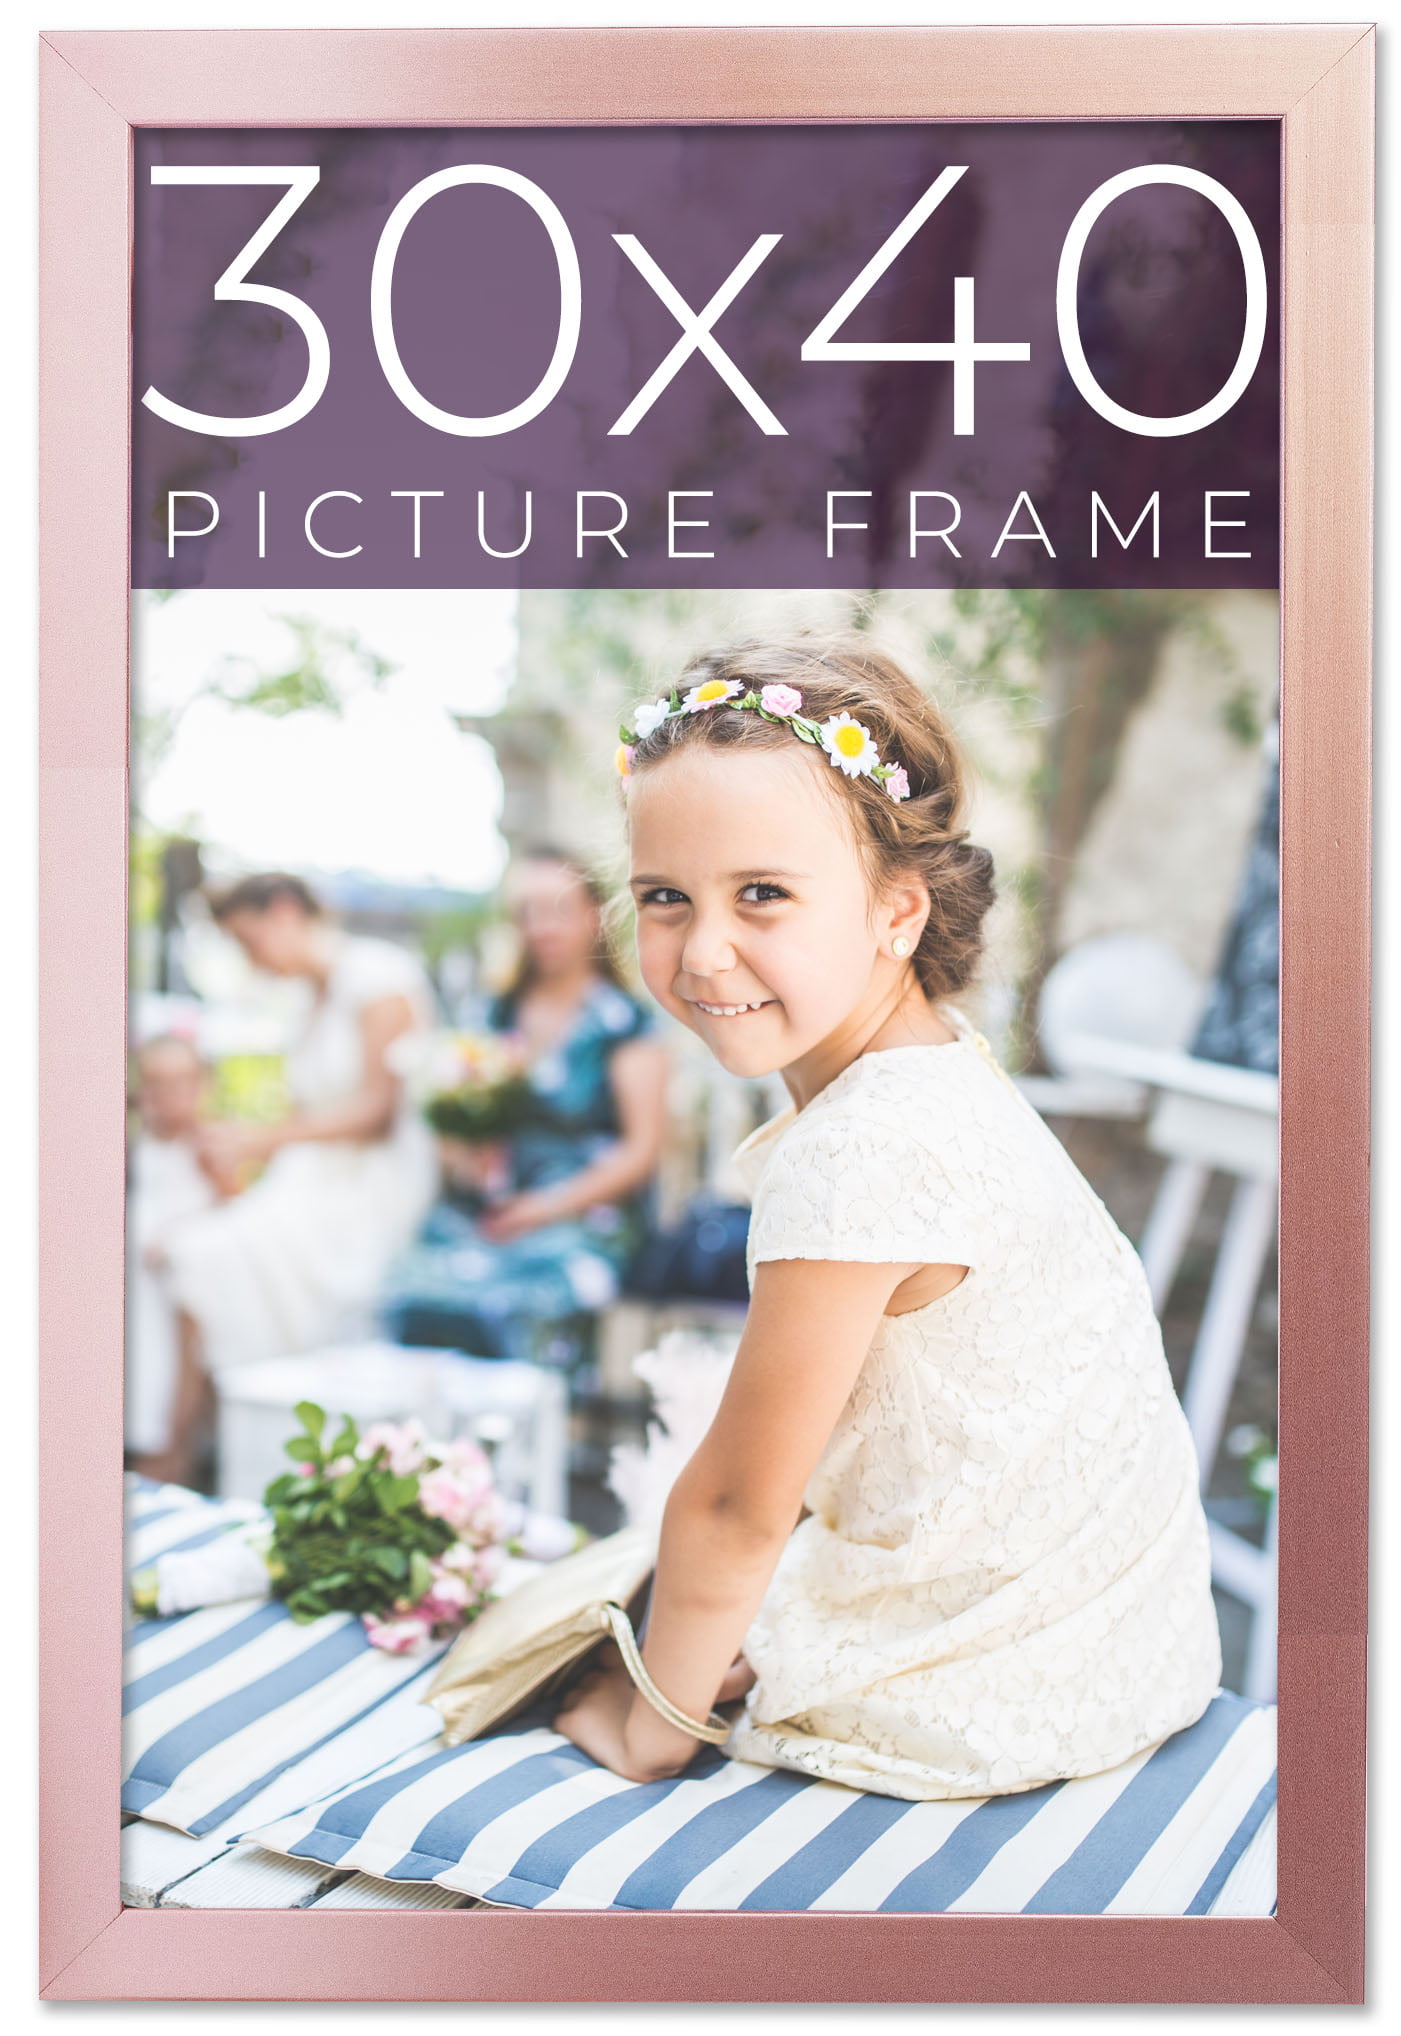 30x40 Frame Pink Real Wood Picture Frame Width 0.75 inches | Interior Frame  Depth 0.5 inches | Rose